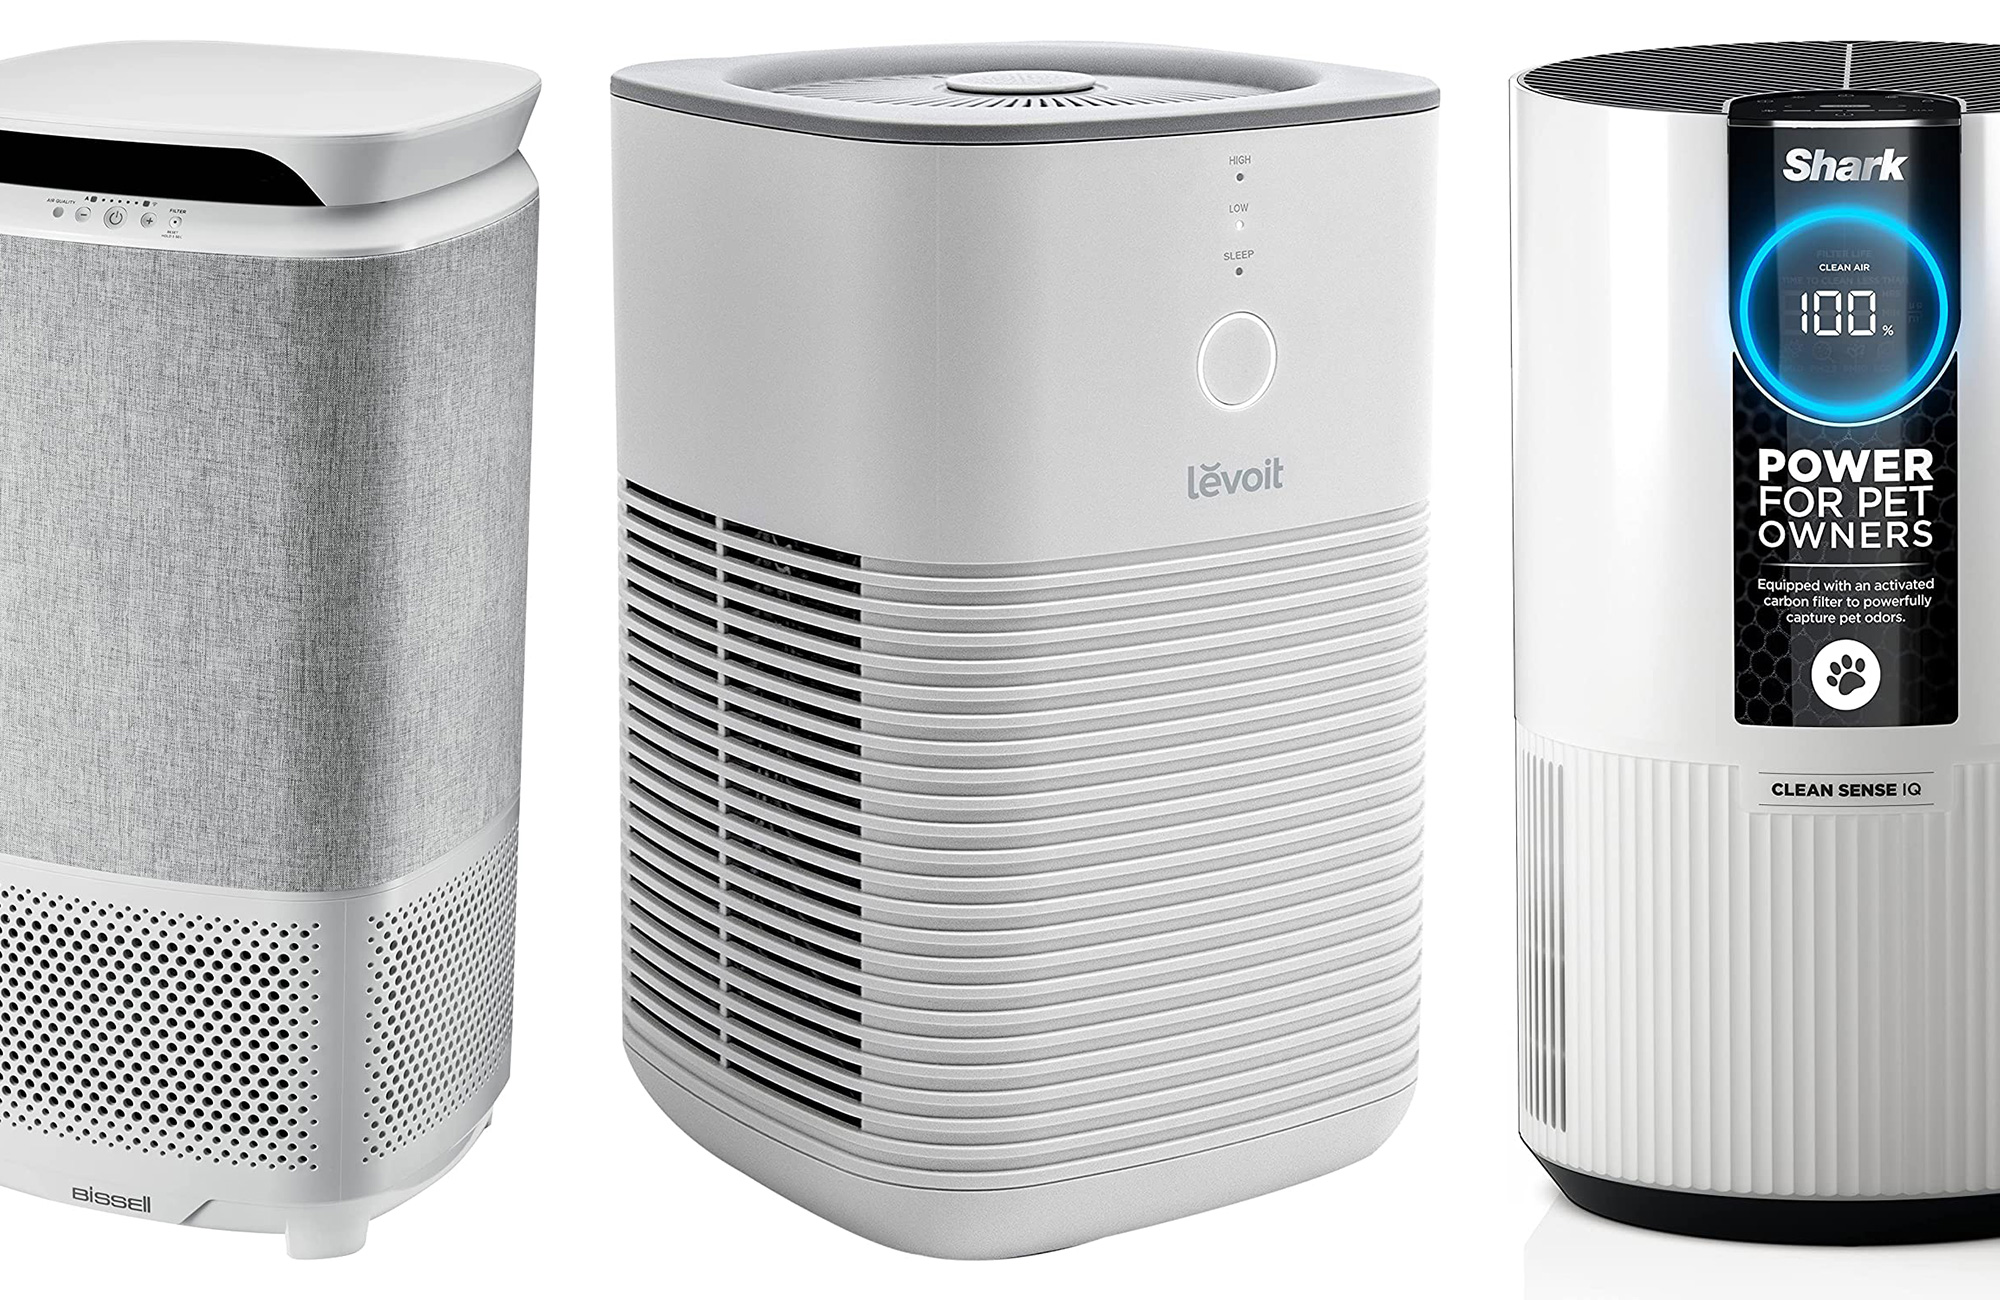 These air purifiers are actually on sale right now at Amazon and Best Buy